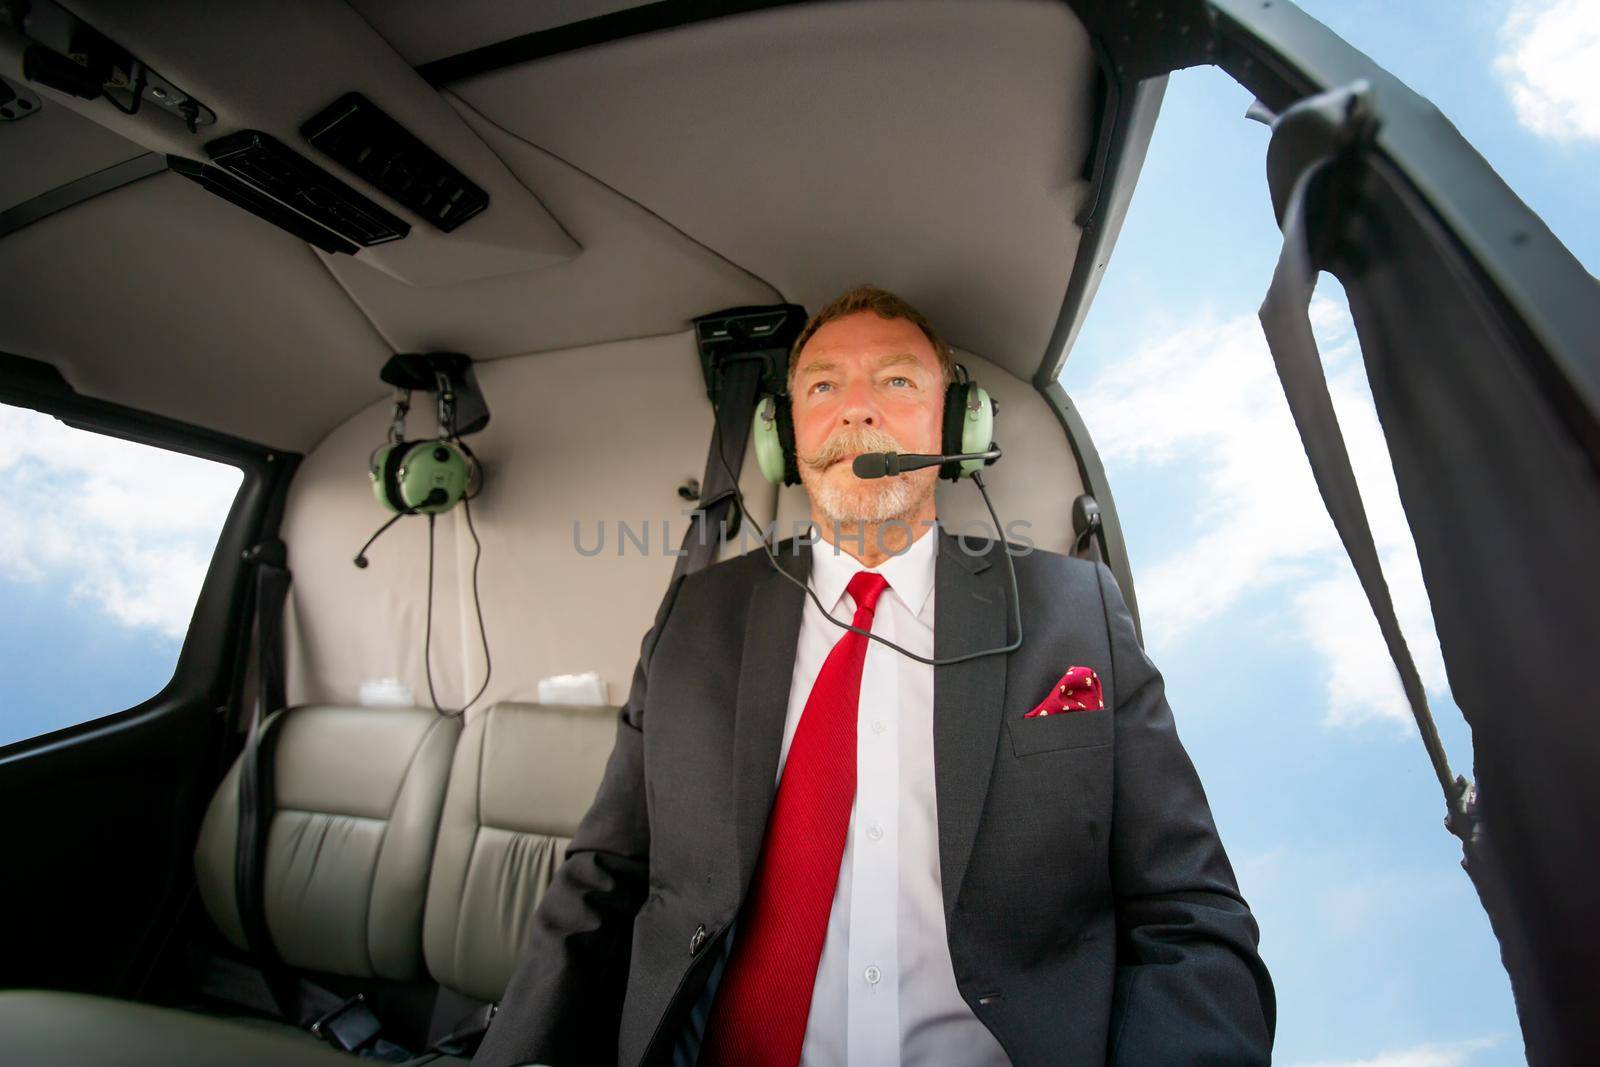 Business people traveling by helicopter , Shot of a mature businessman using a headset while traveling in a helicopter